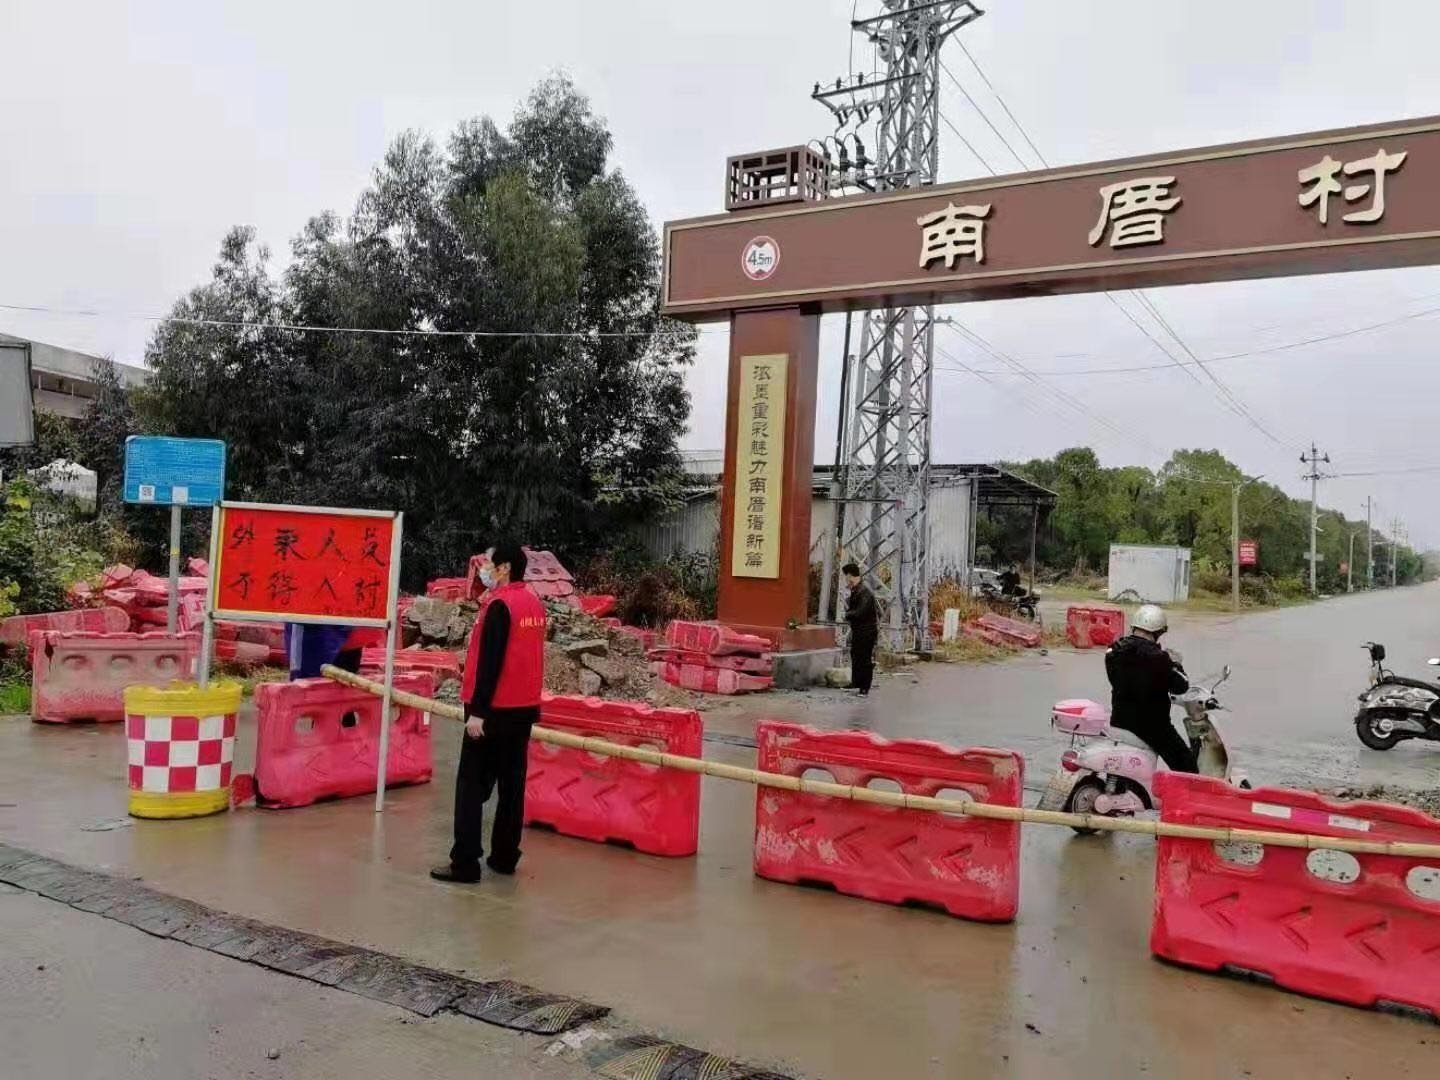 Many cities and provinces have put up roadblocks to keep out people from Hubei. Photo: Handout